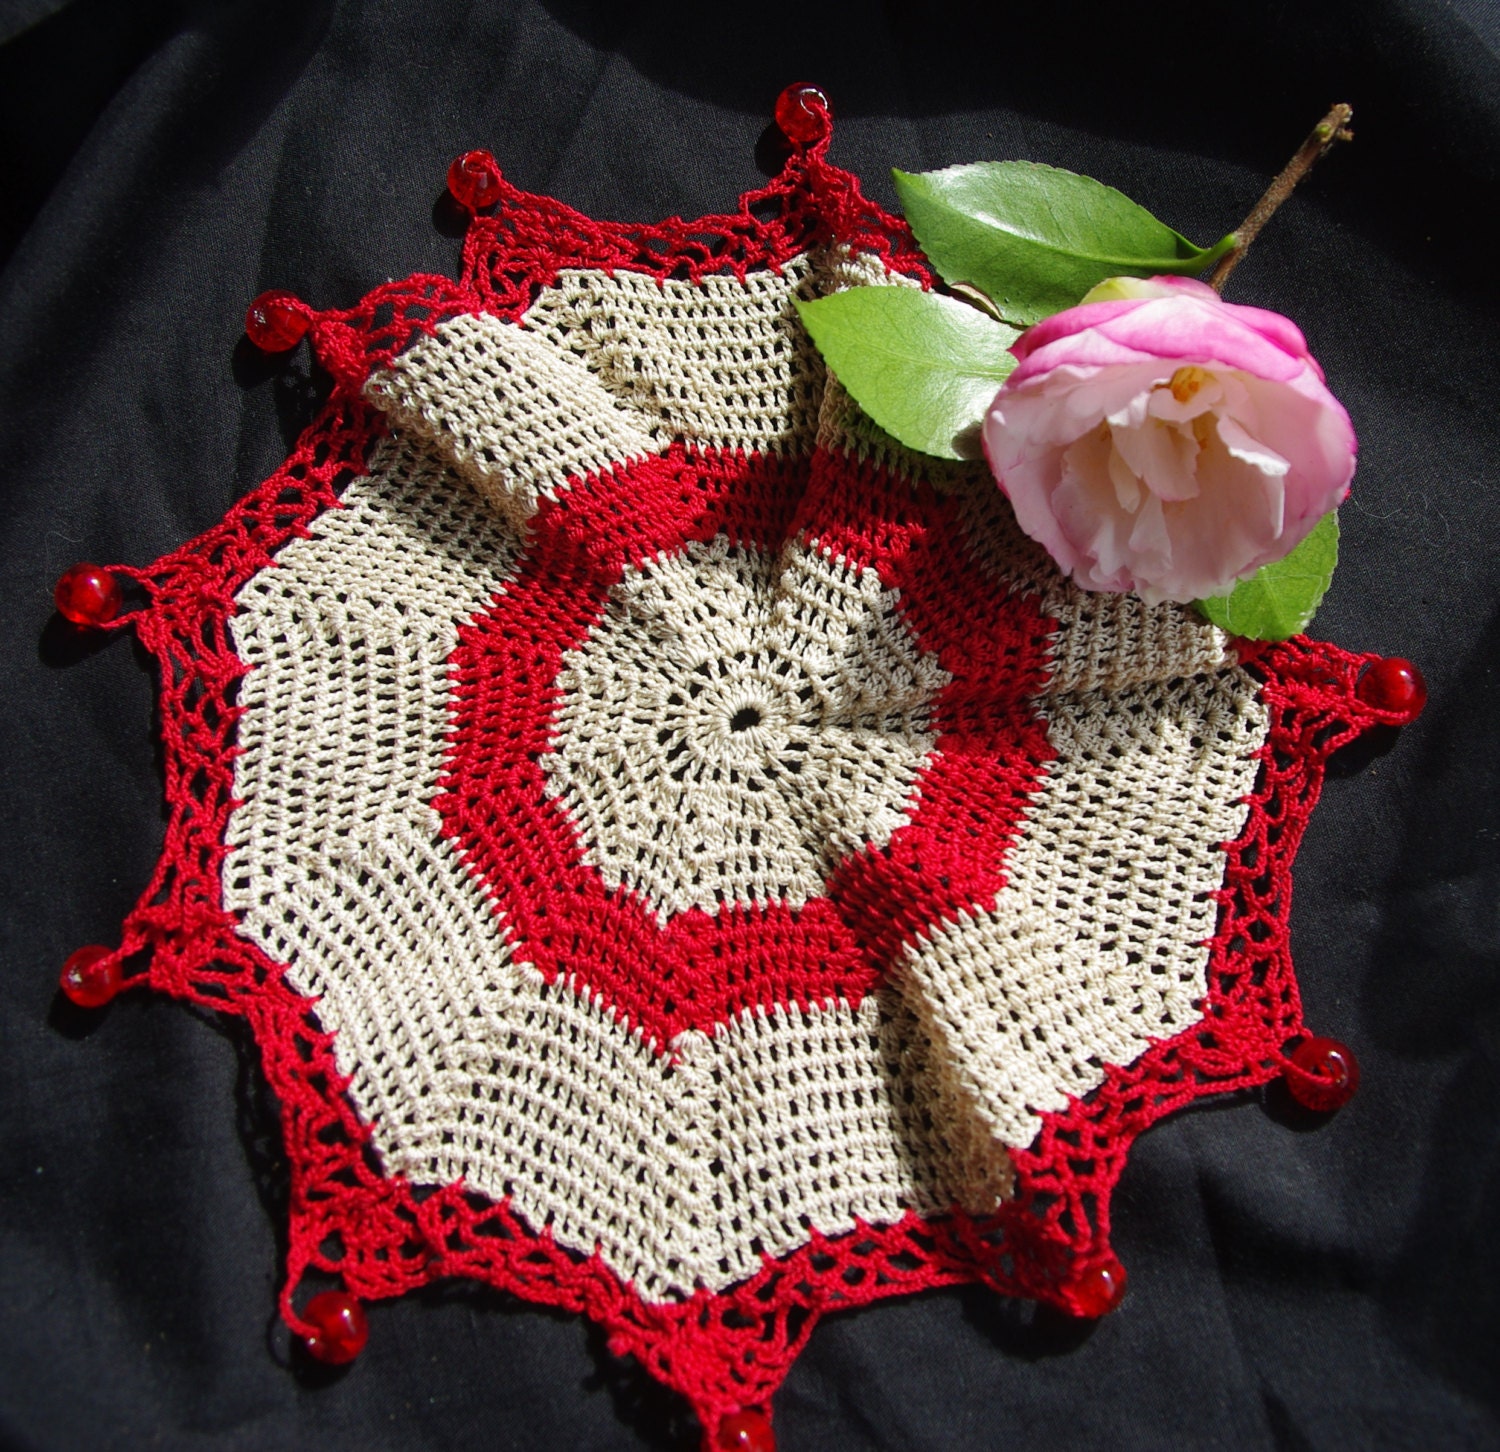 Antique Crocheted Milk Jug Cover. Cream & Red Glass Beads. Afternoon Tea Party